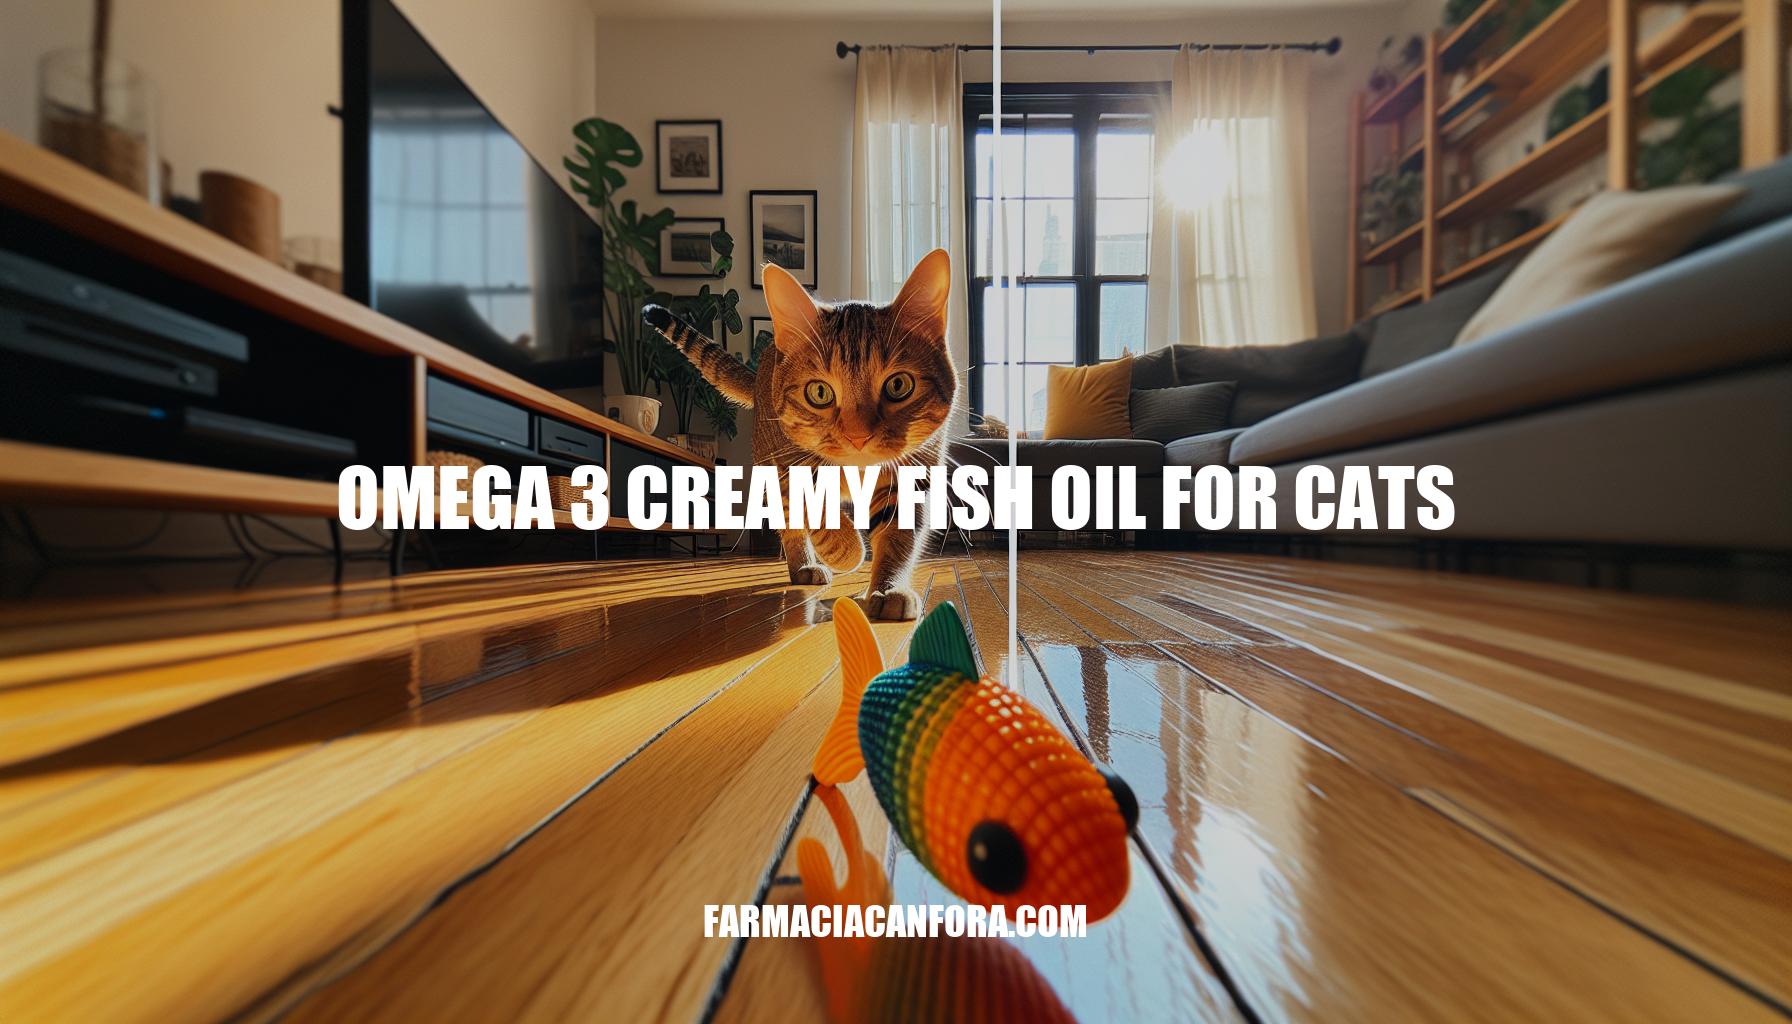 The Benefits of Omega 3 Creamy Fish Oil for Cats